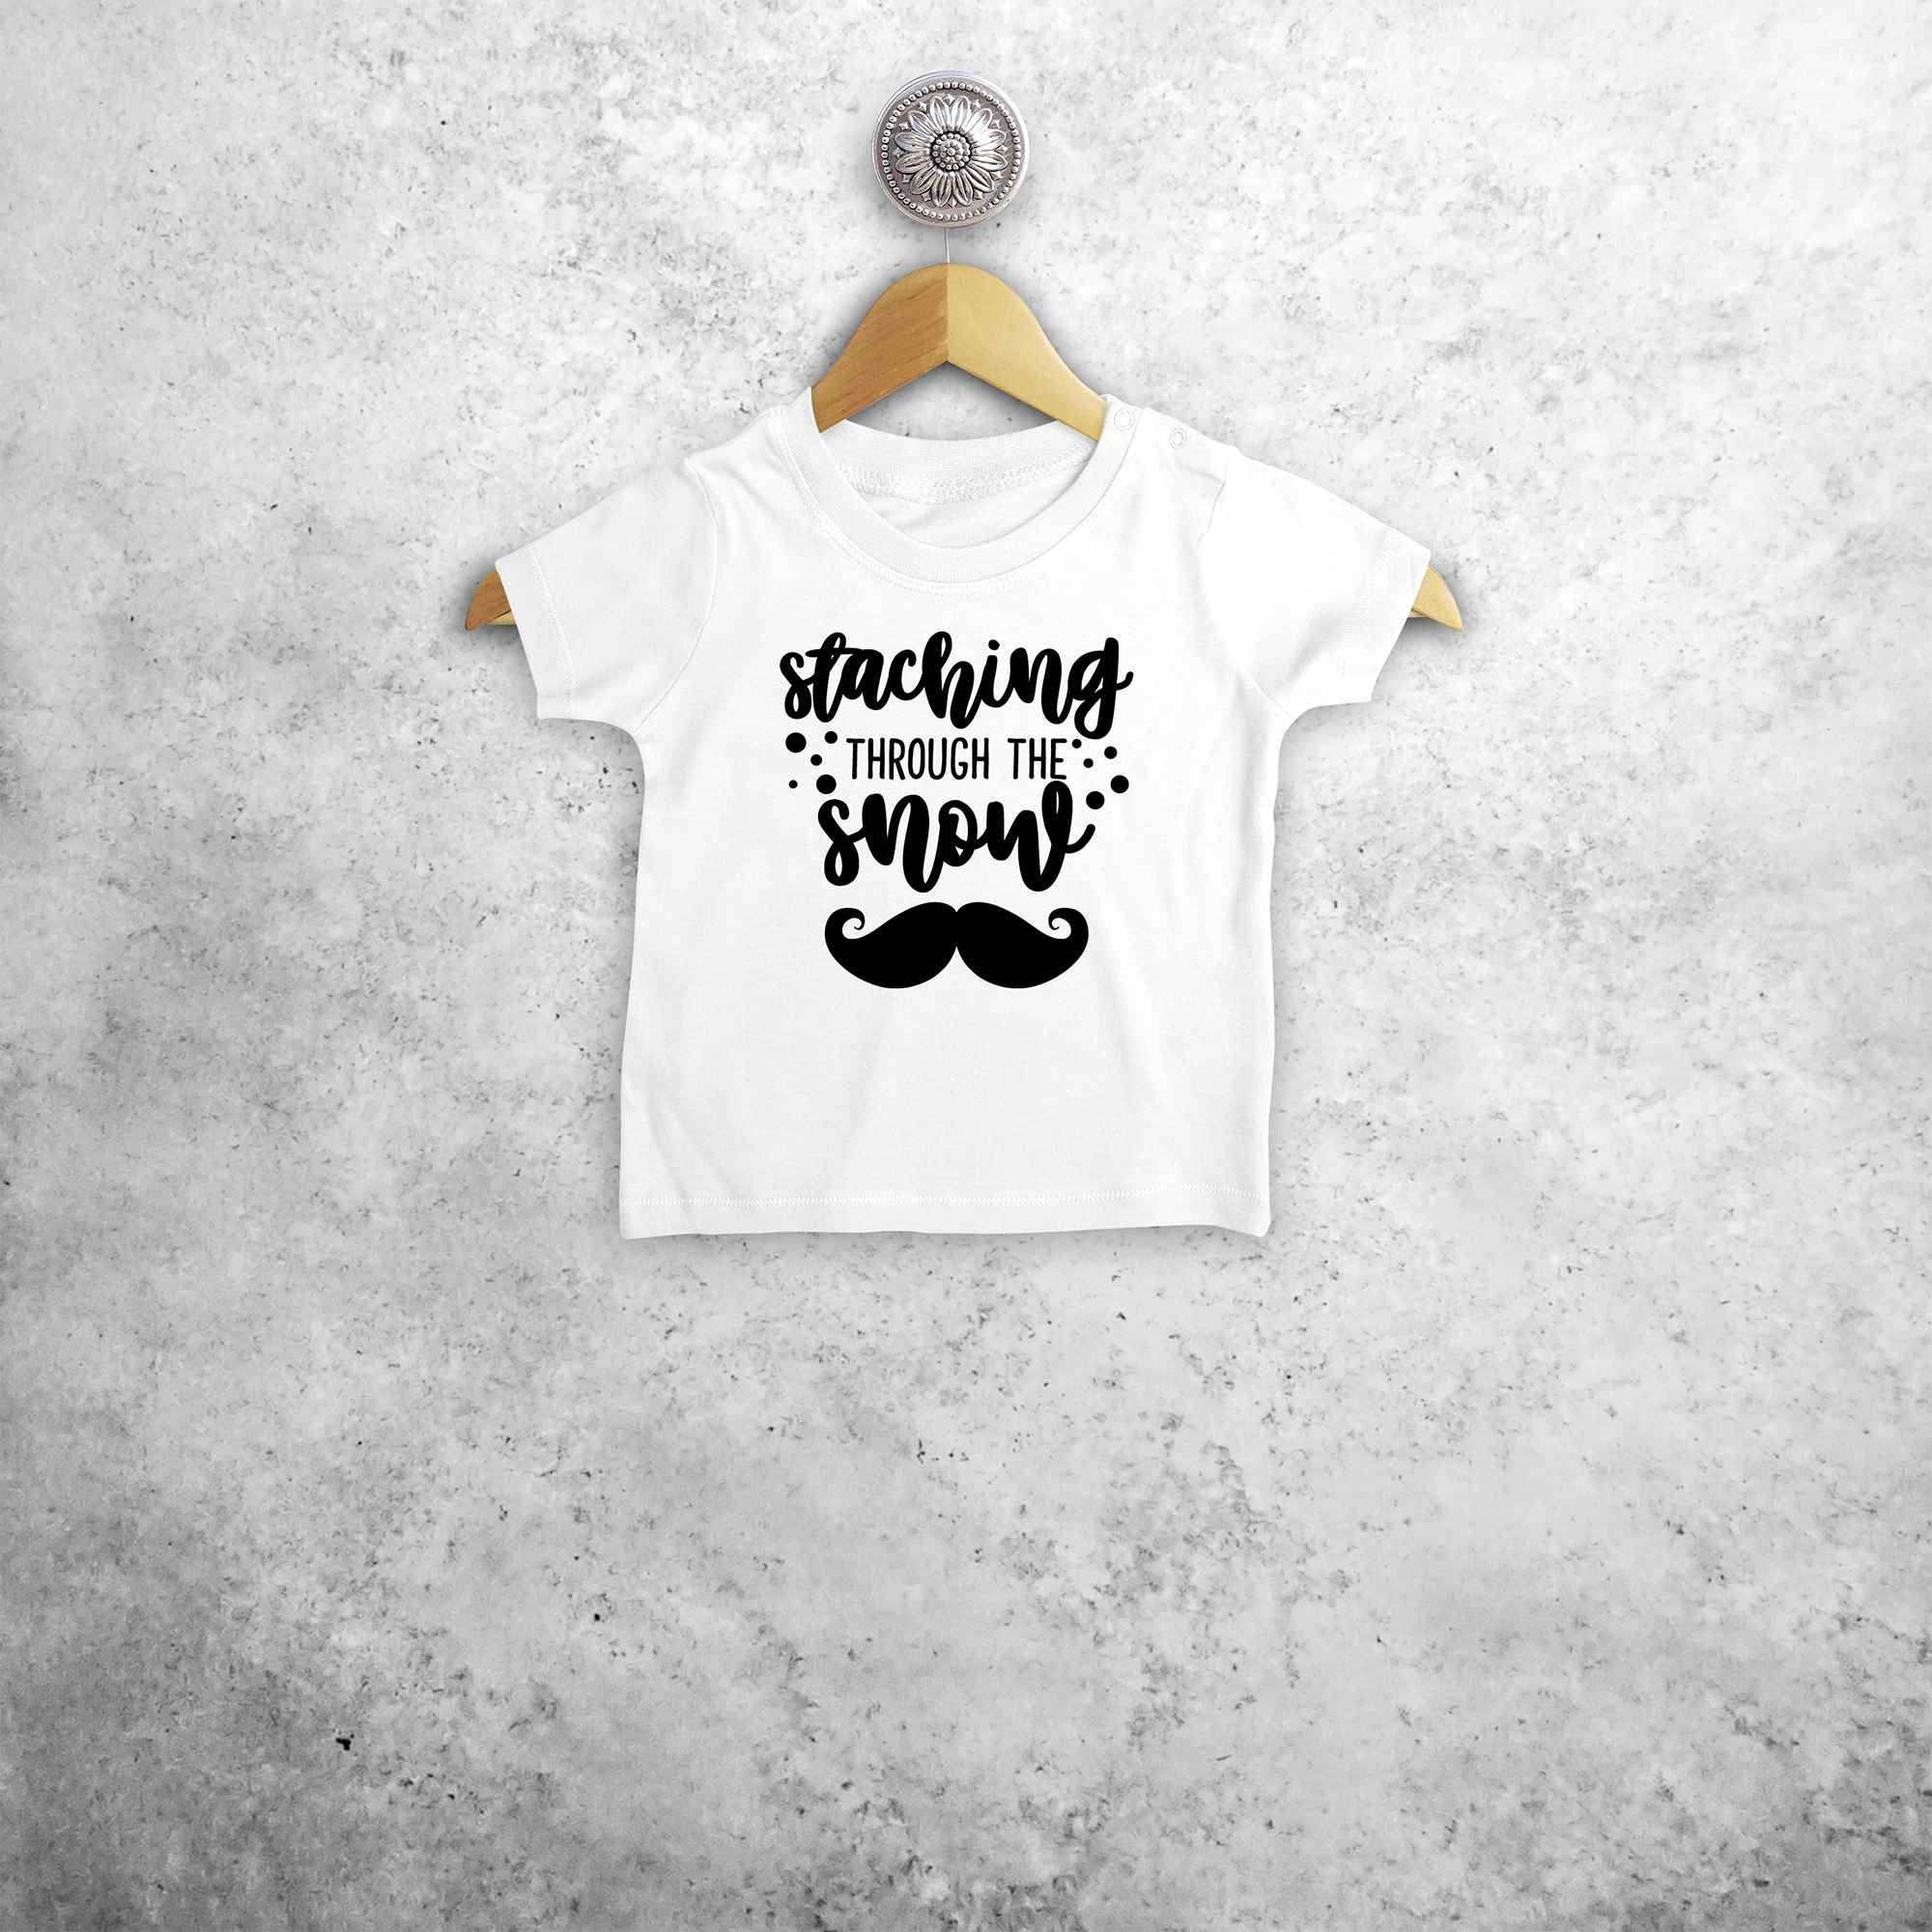 Baby or toddler shirt with short sleeves, with ‘Staching through the snow’ print by KMLeon.